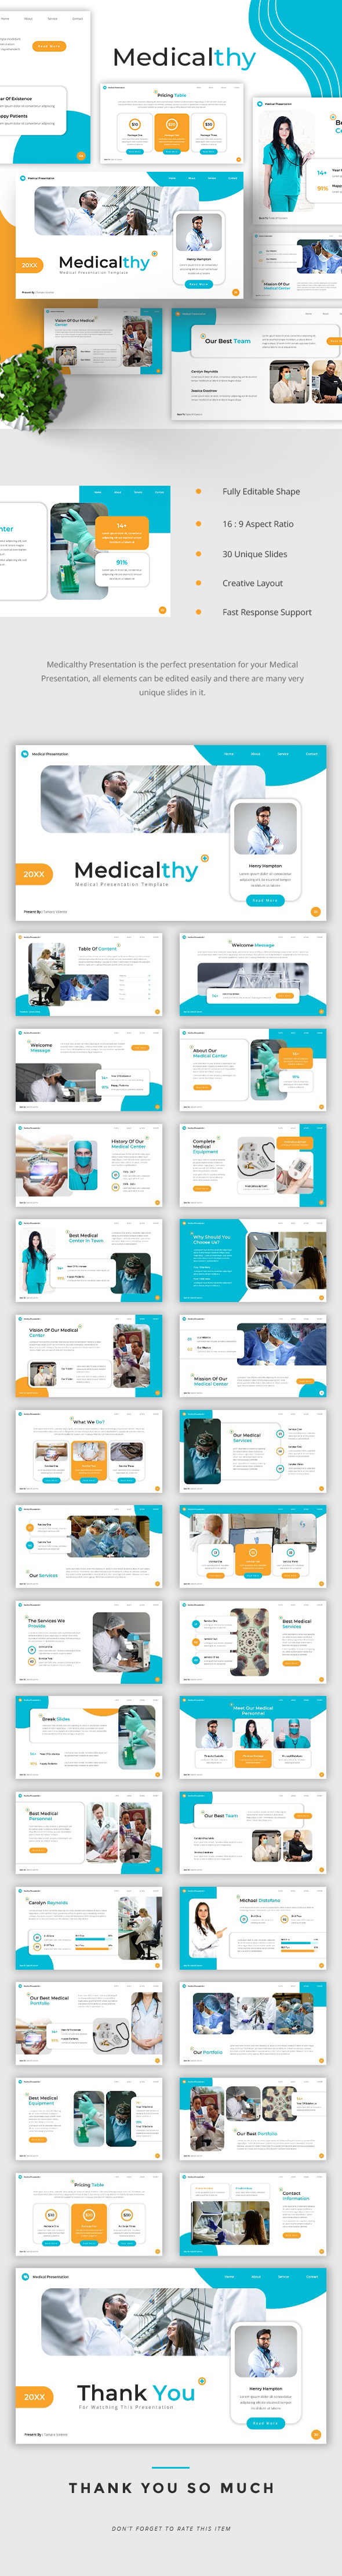 Medicalthy - Medical PowerPoint